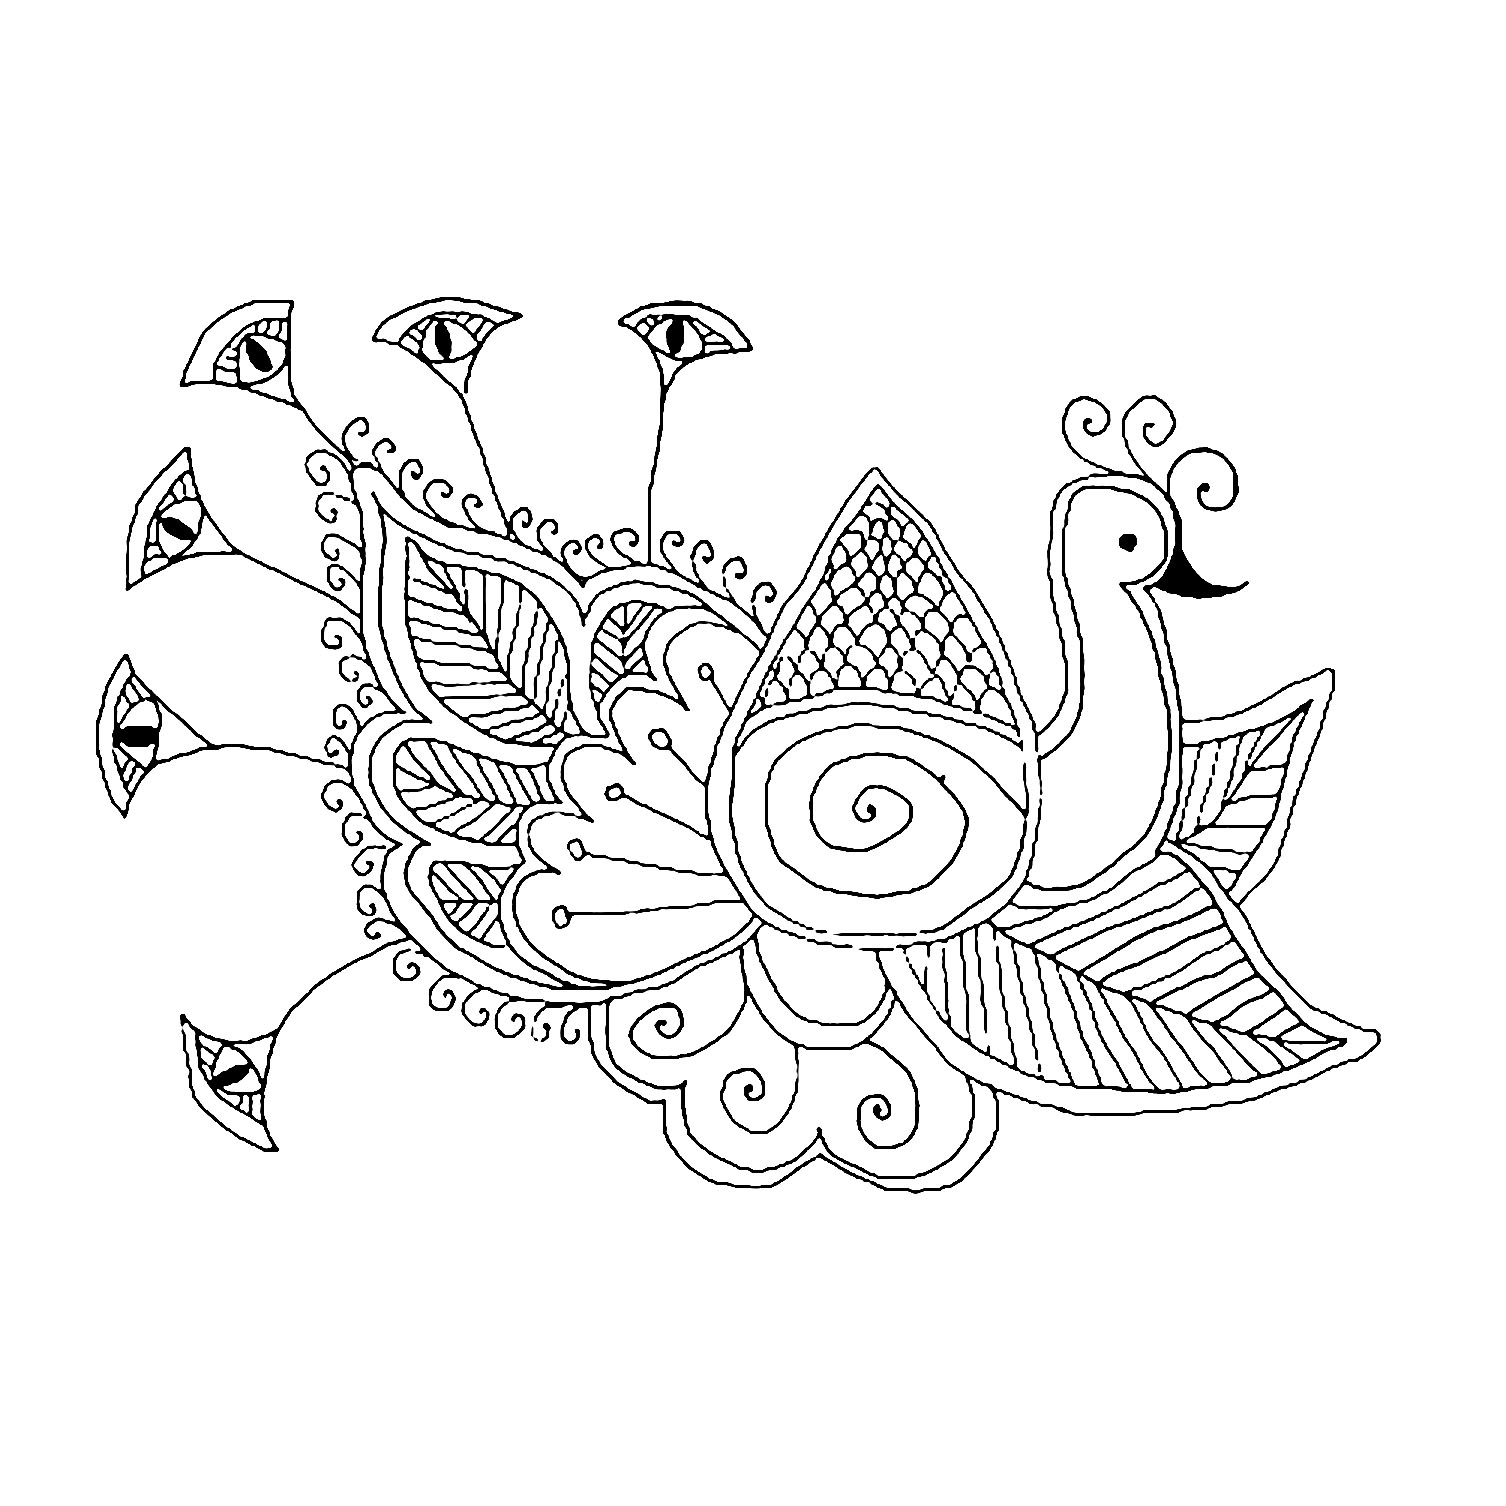 Easy free Peacocks coloring page to download